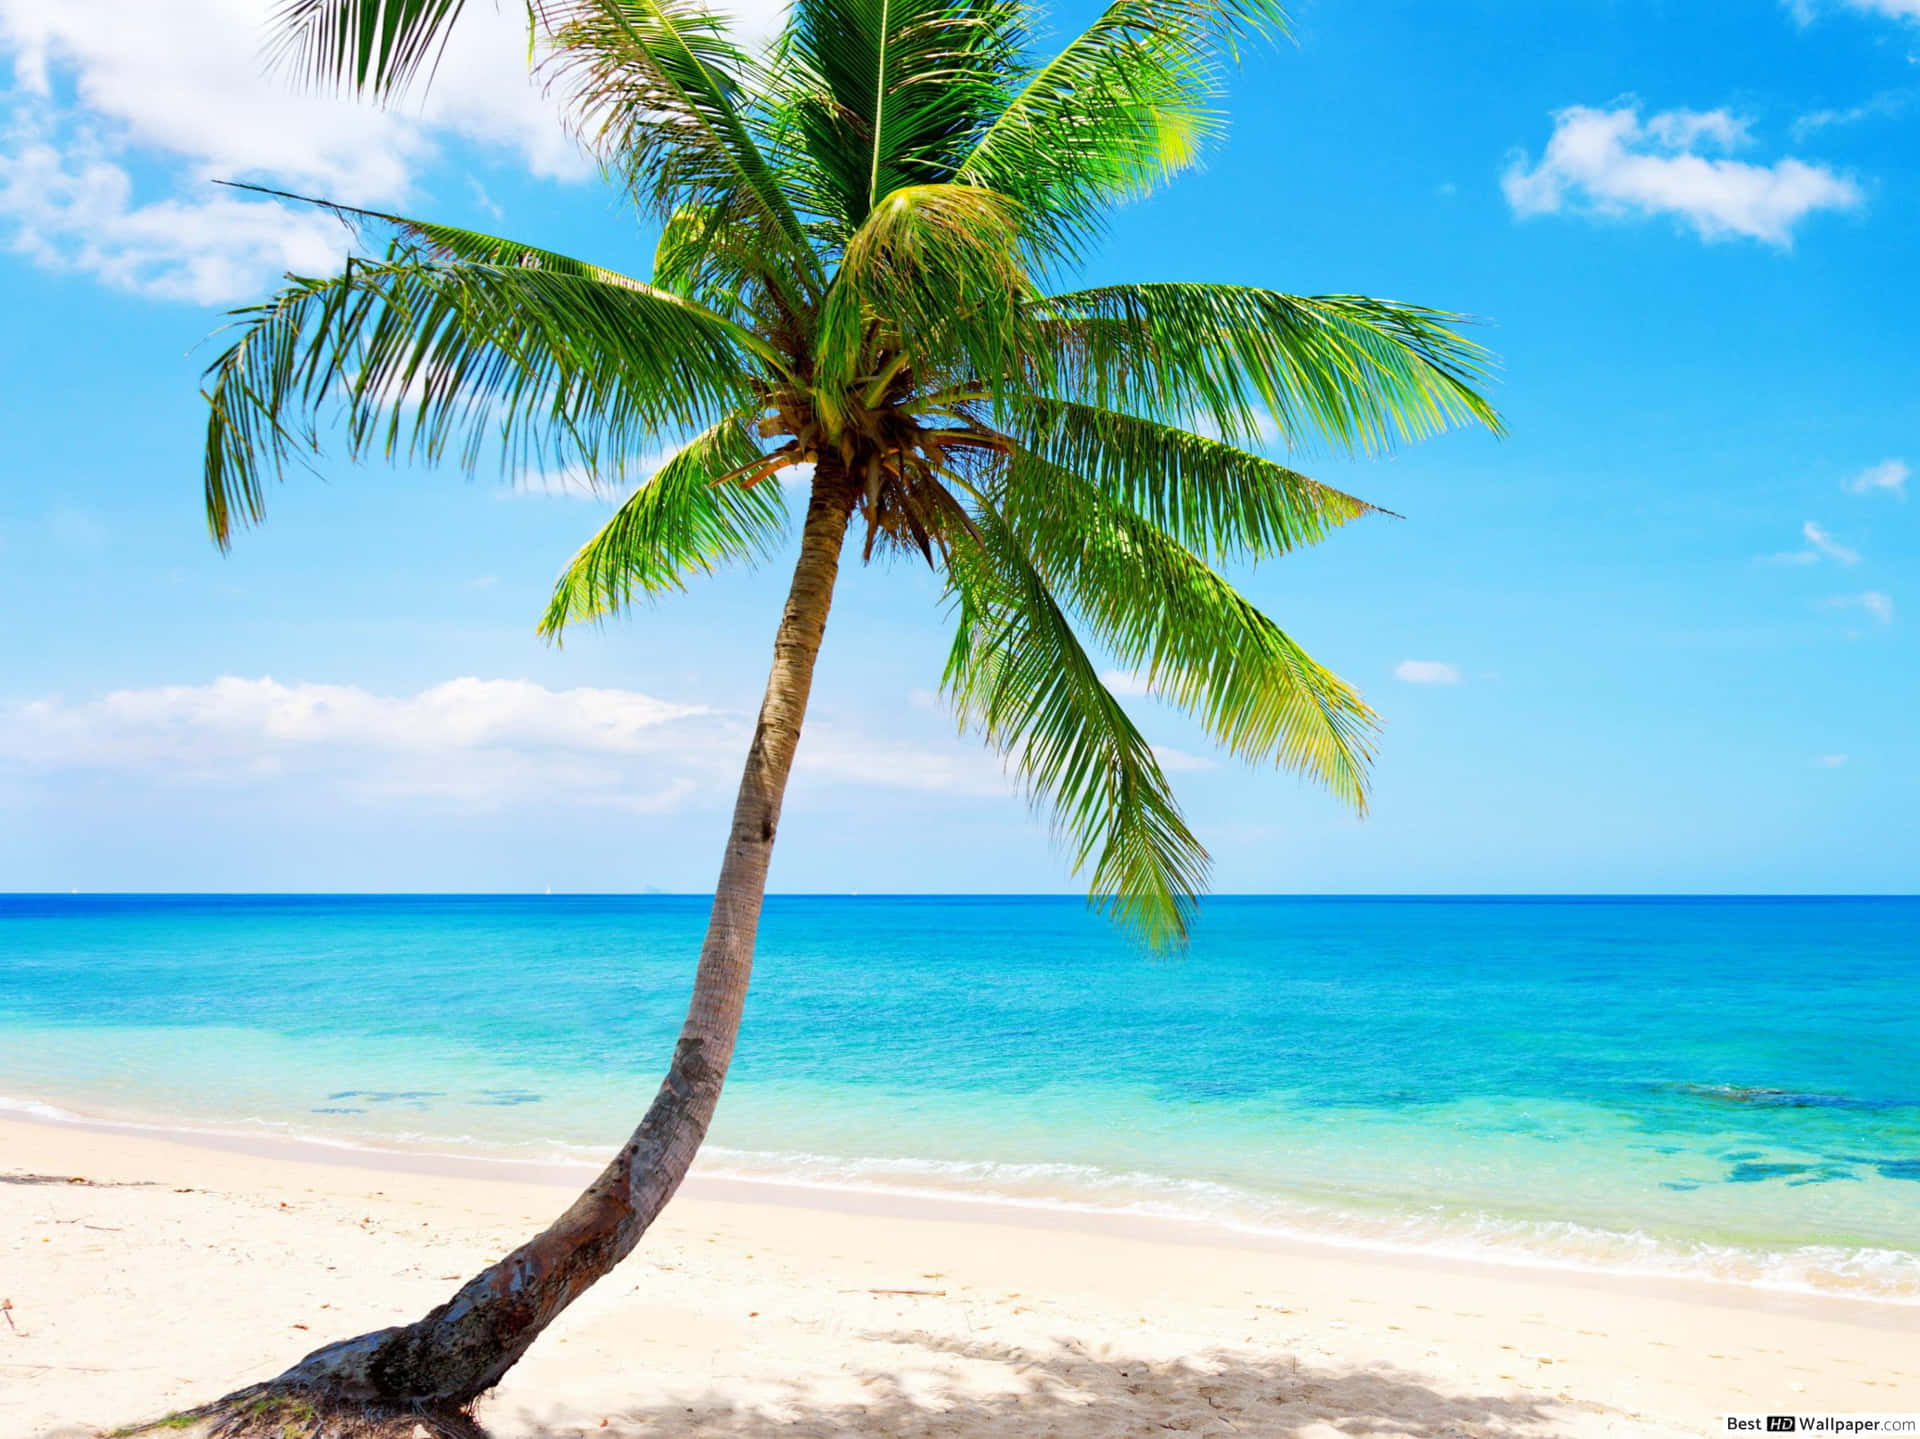 Relax on the serene beach of paradise Wallpaper